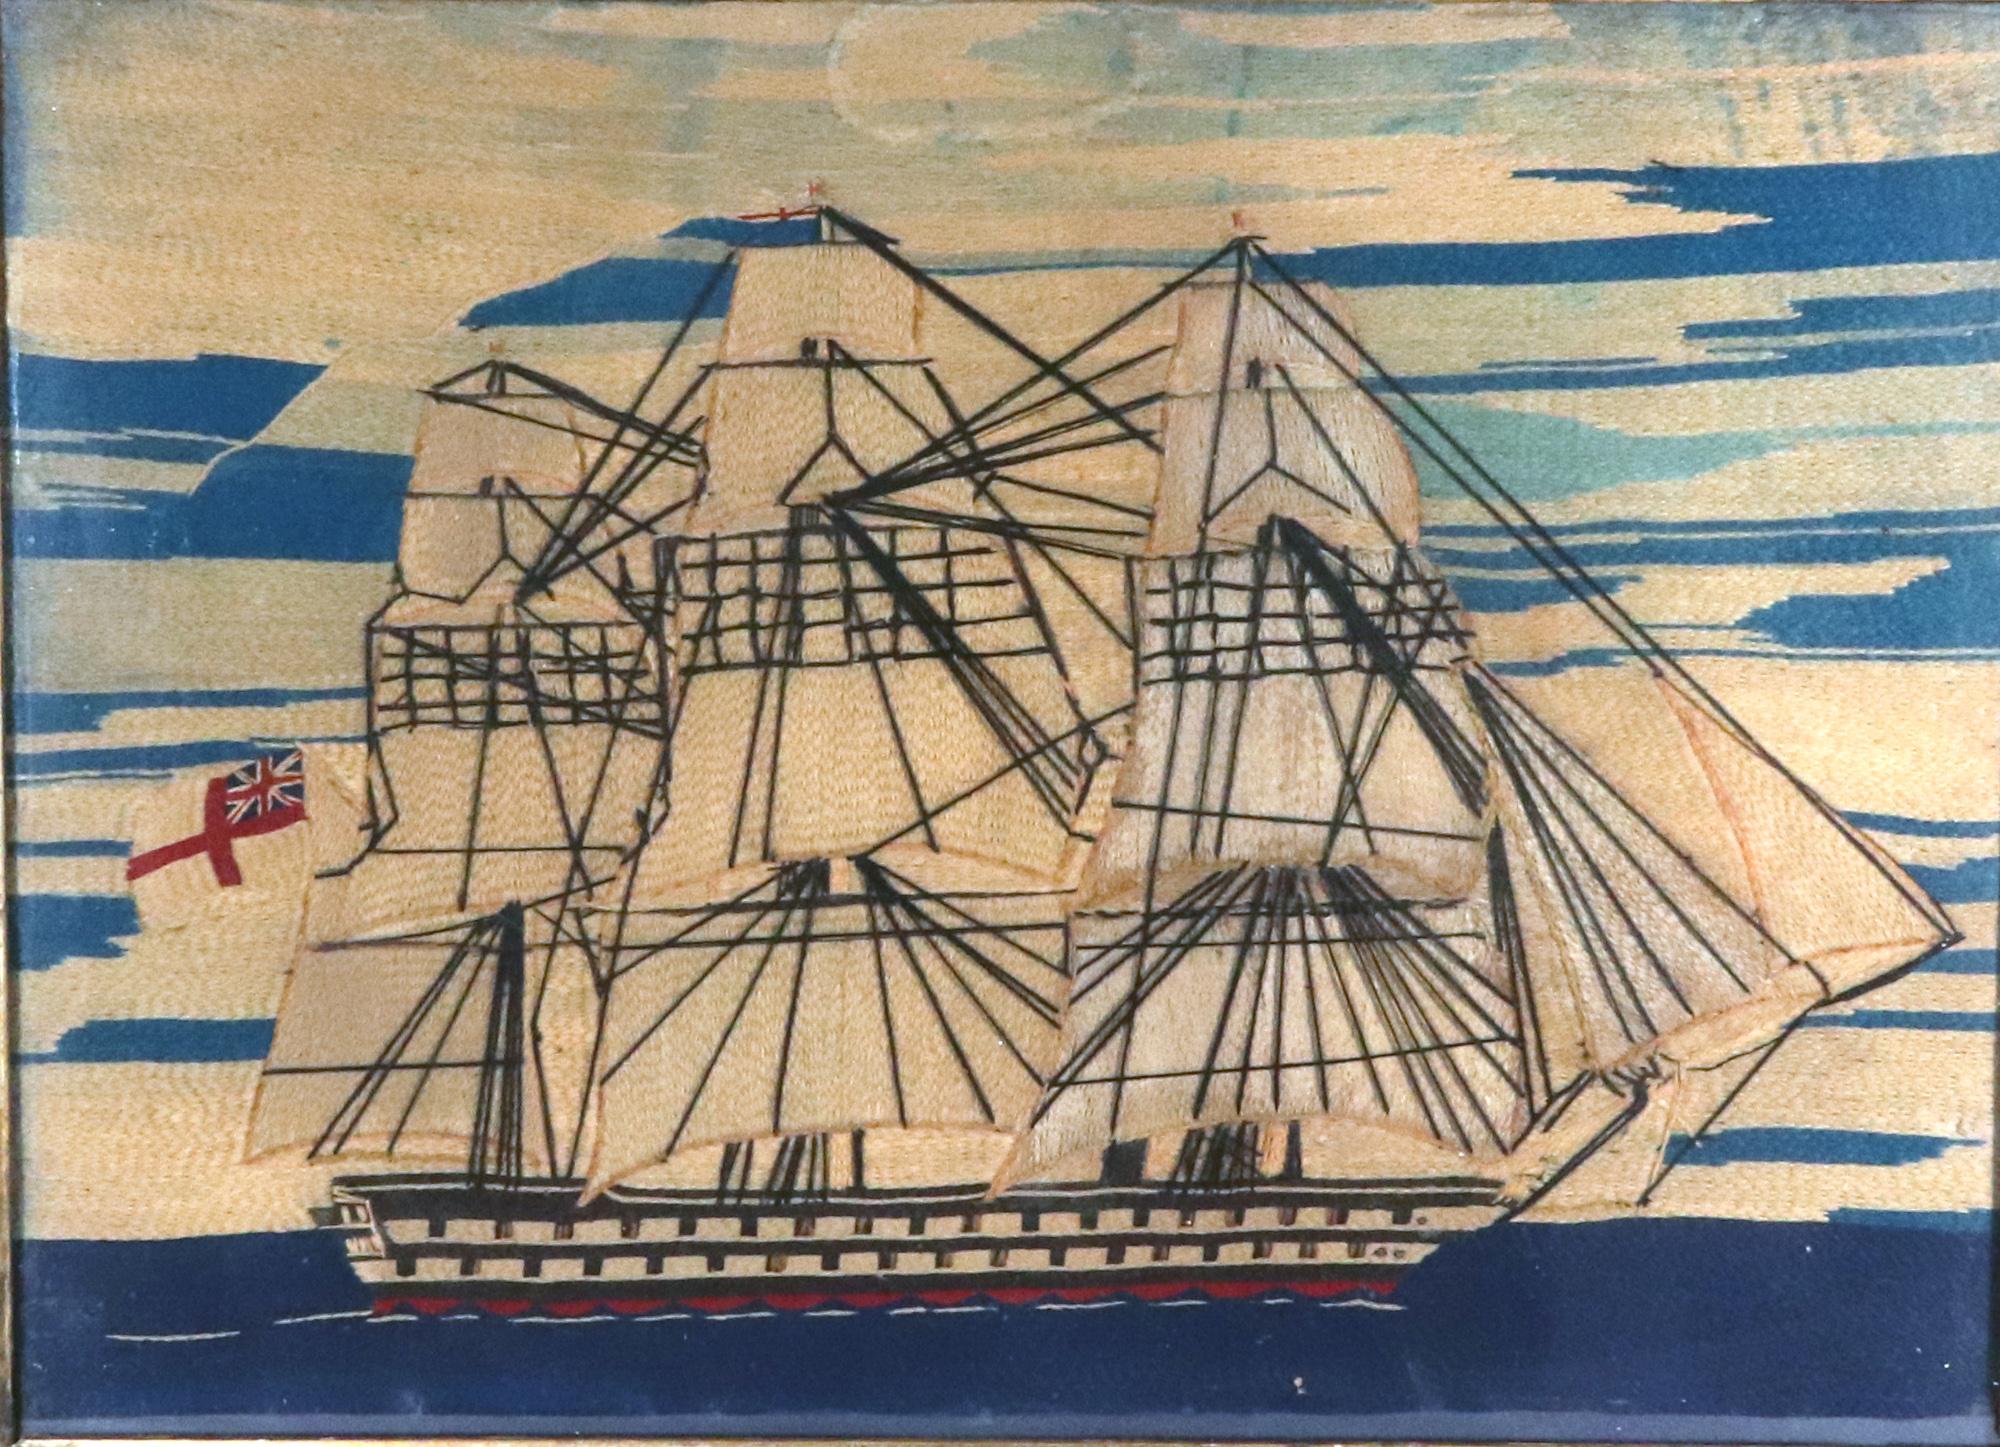 British Sailor's Woolwork of Royal Navy Ship,

The sailor's woolwork or woolie depicts a starboard view of a Second-Rate Royal Navy Ship with three masts.  The rigging is done in a thick thread and is quite prominent in the image.  The ship flies a